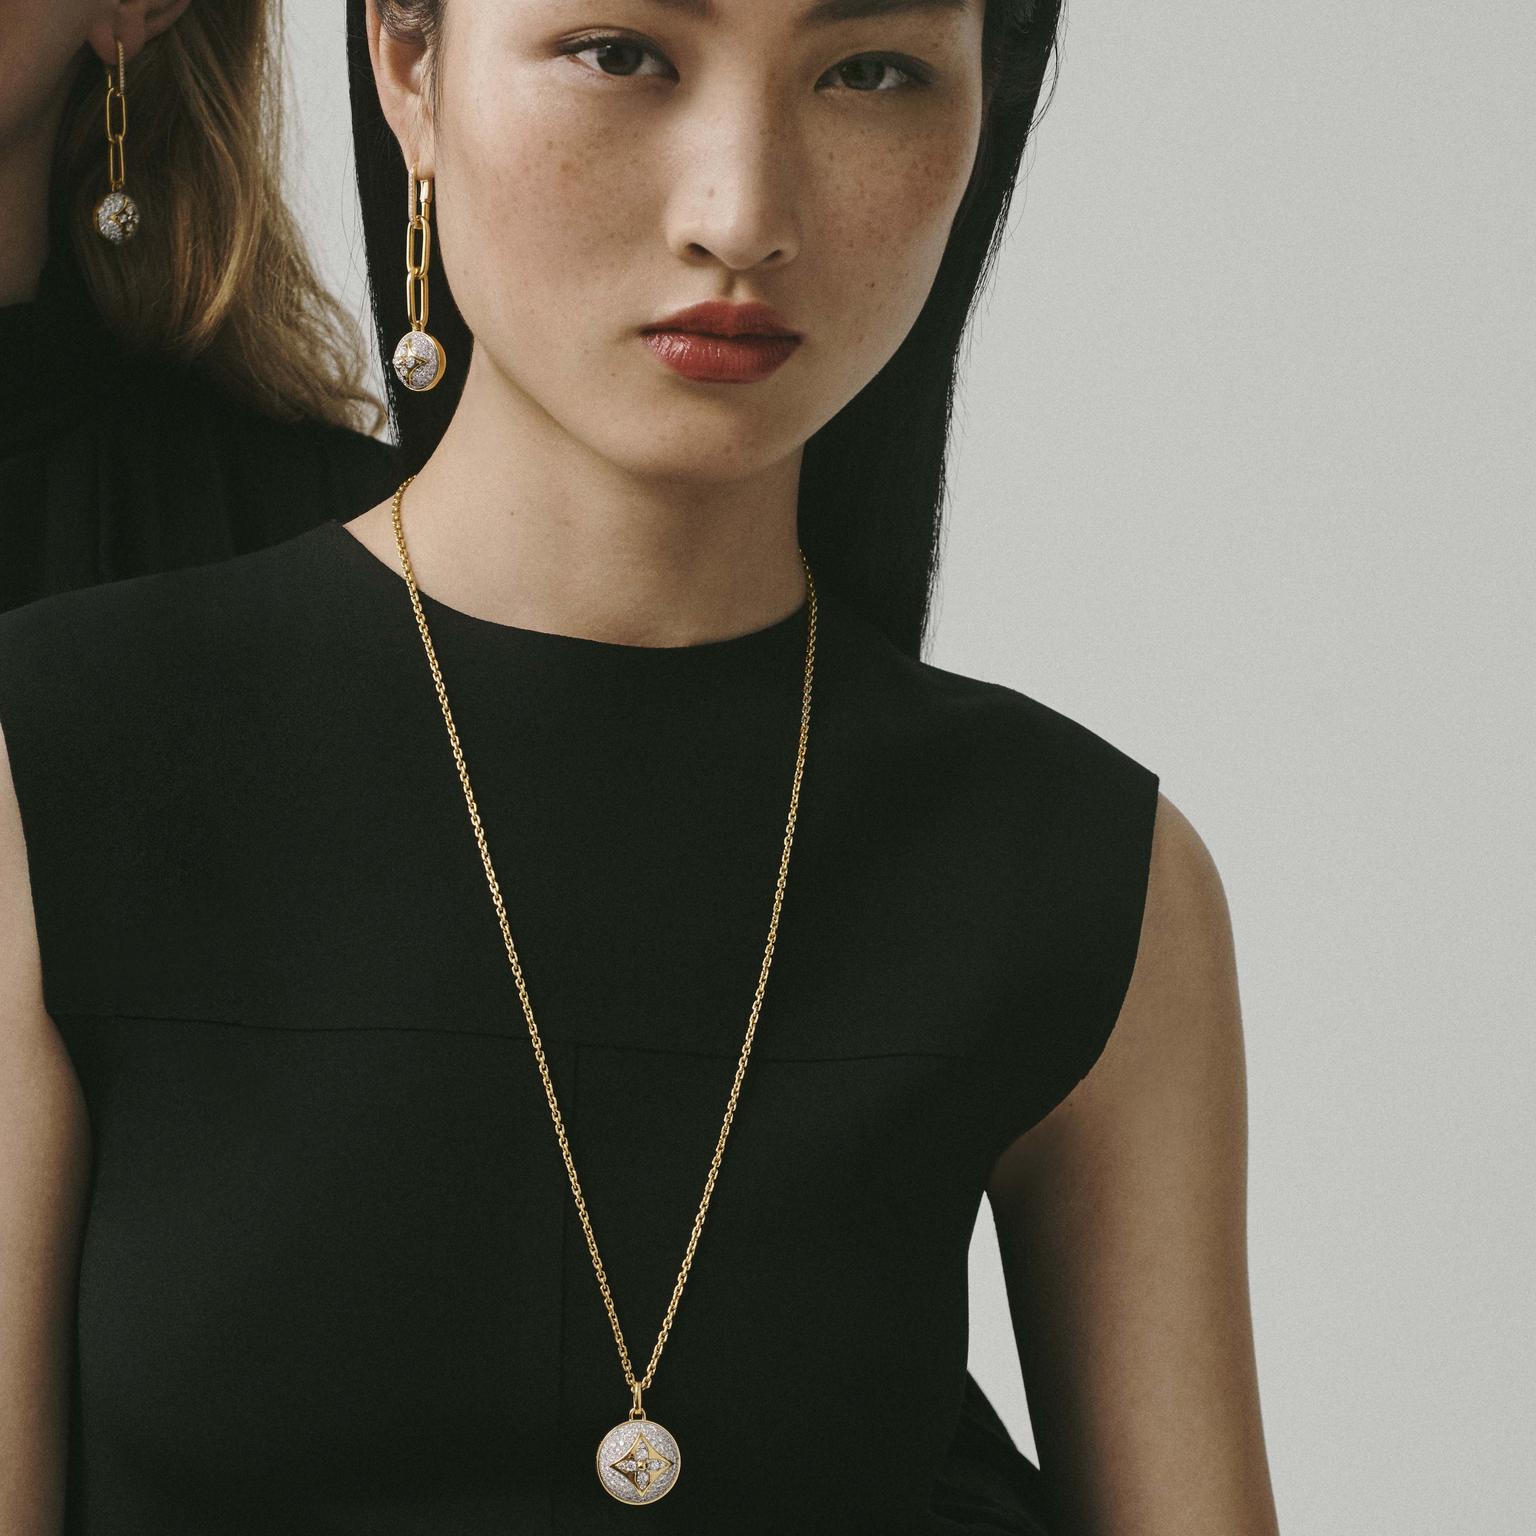 Louis Vuitton B.Blossom necklace and earrings on model